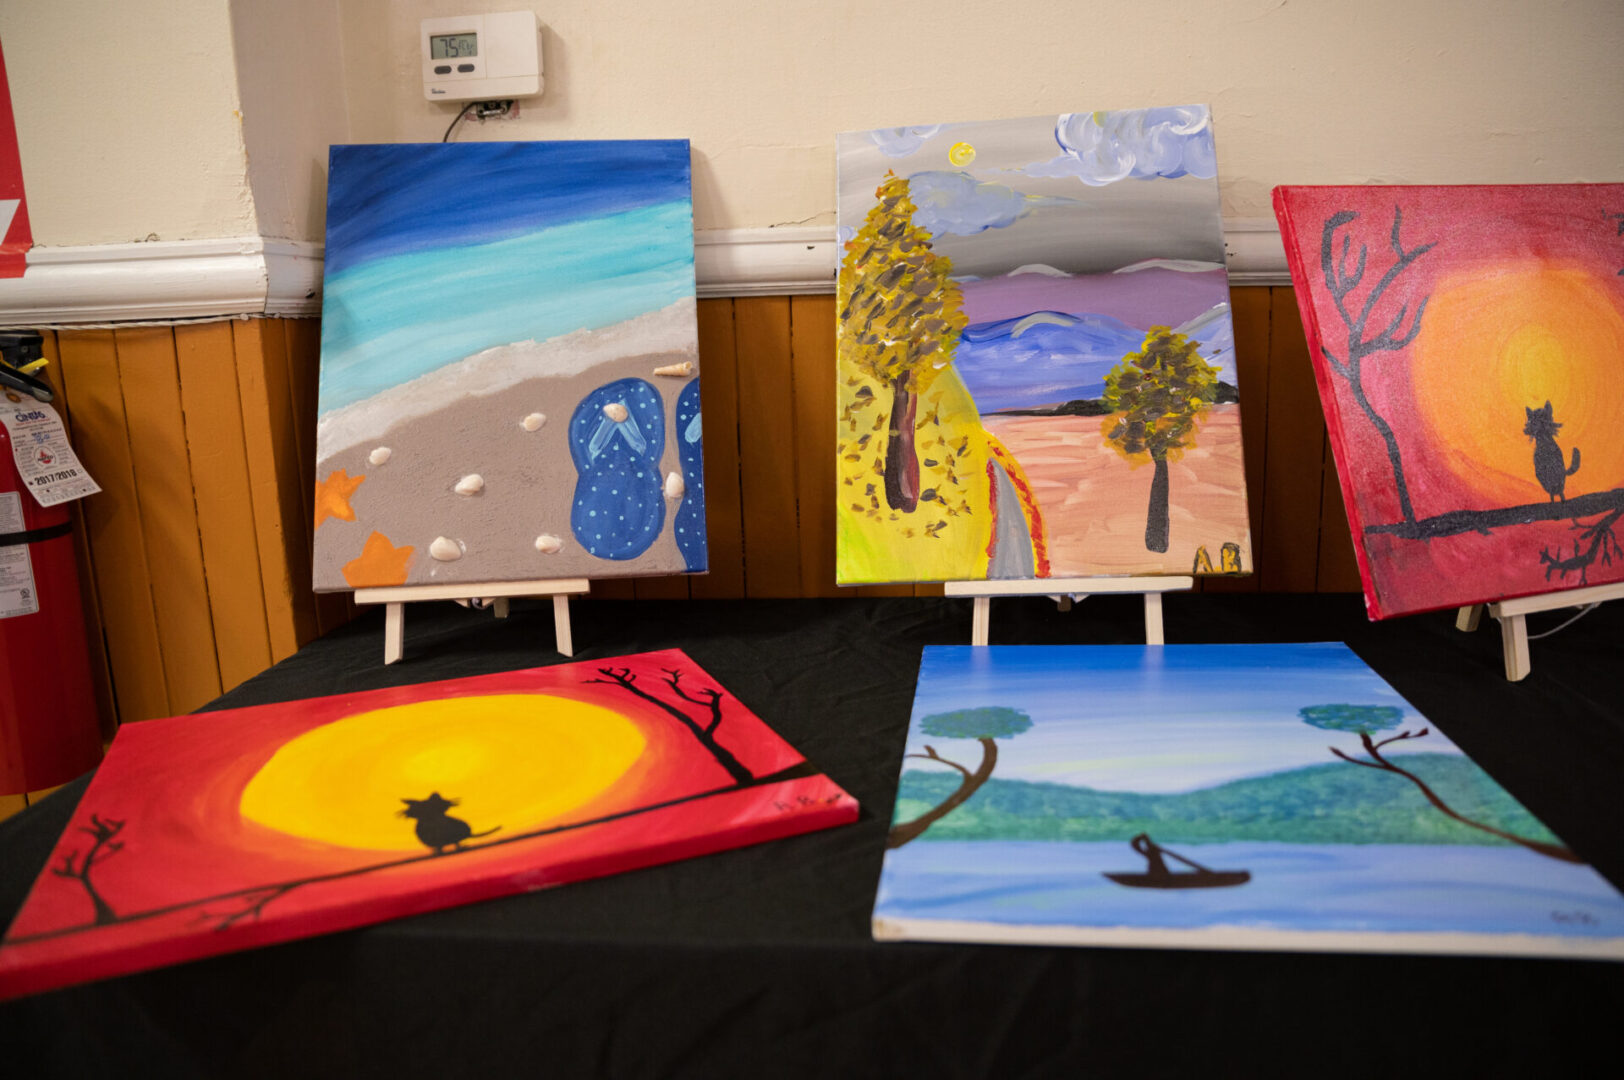 Seashore and slippers painting and two trees on a road to a mountain painting